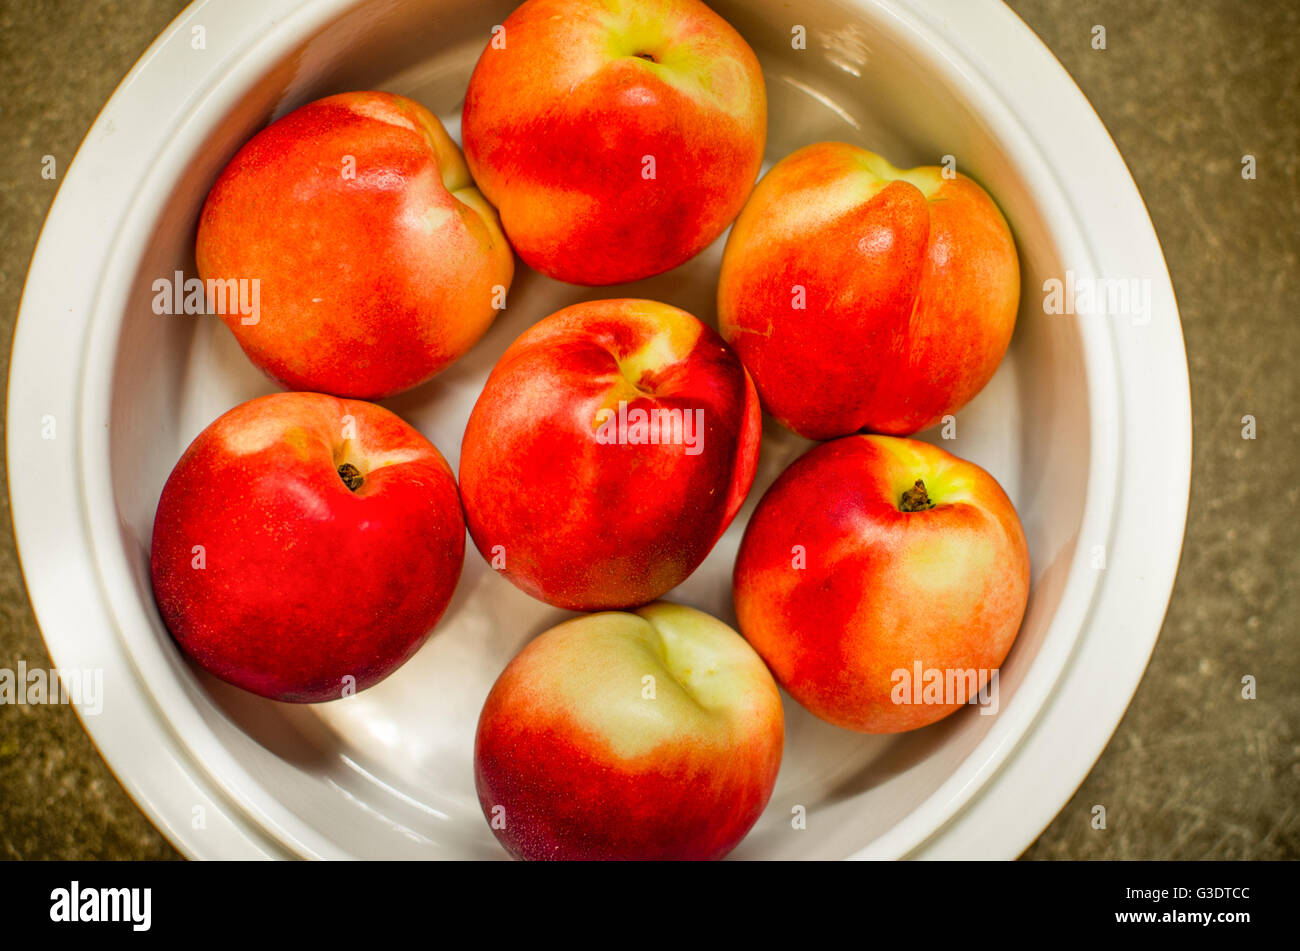 clean eating peaches background Stock Photo